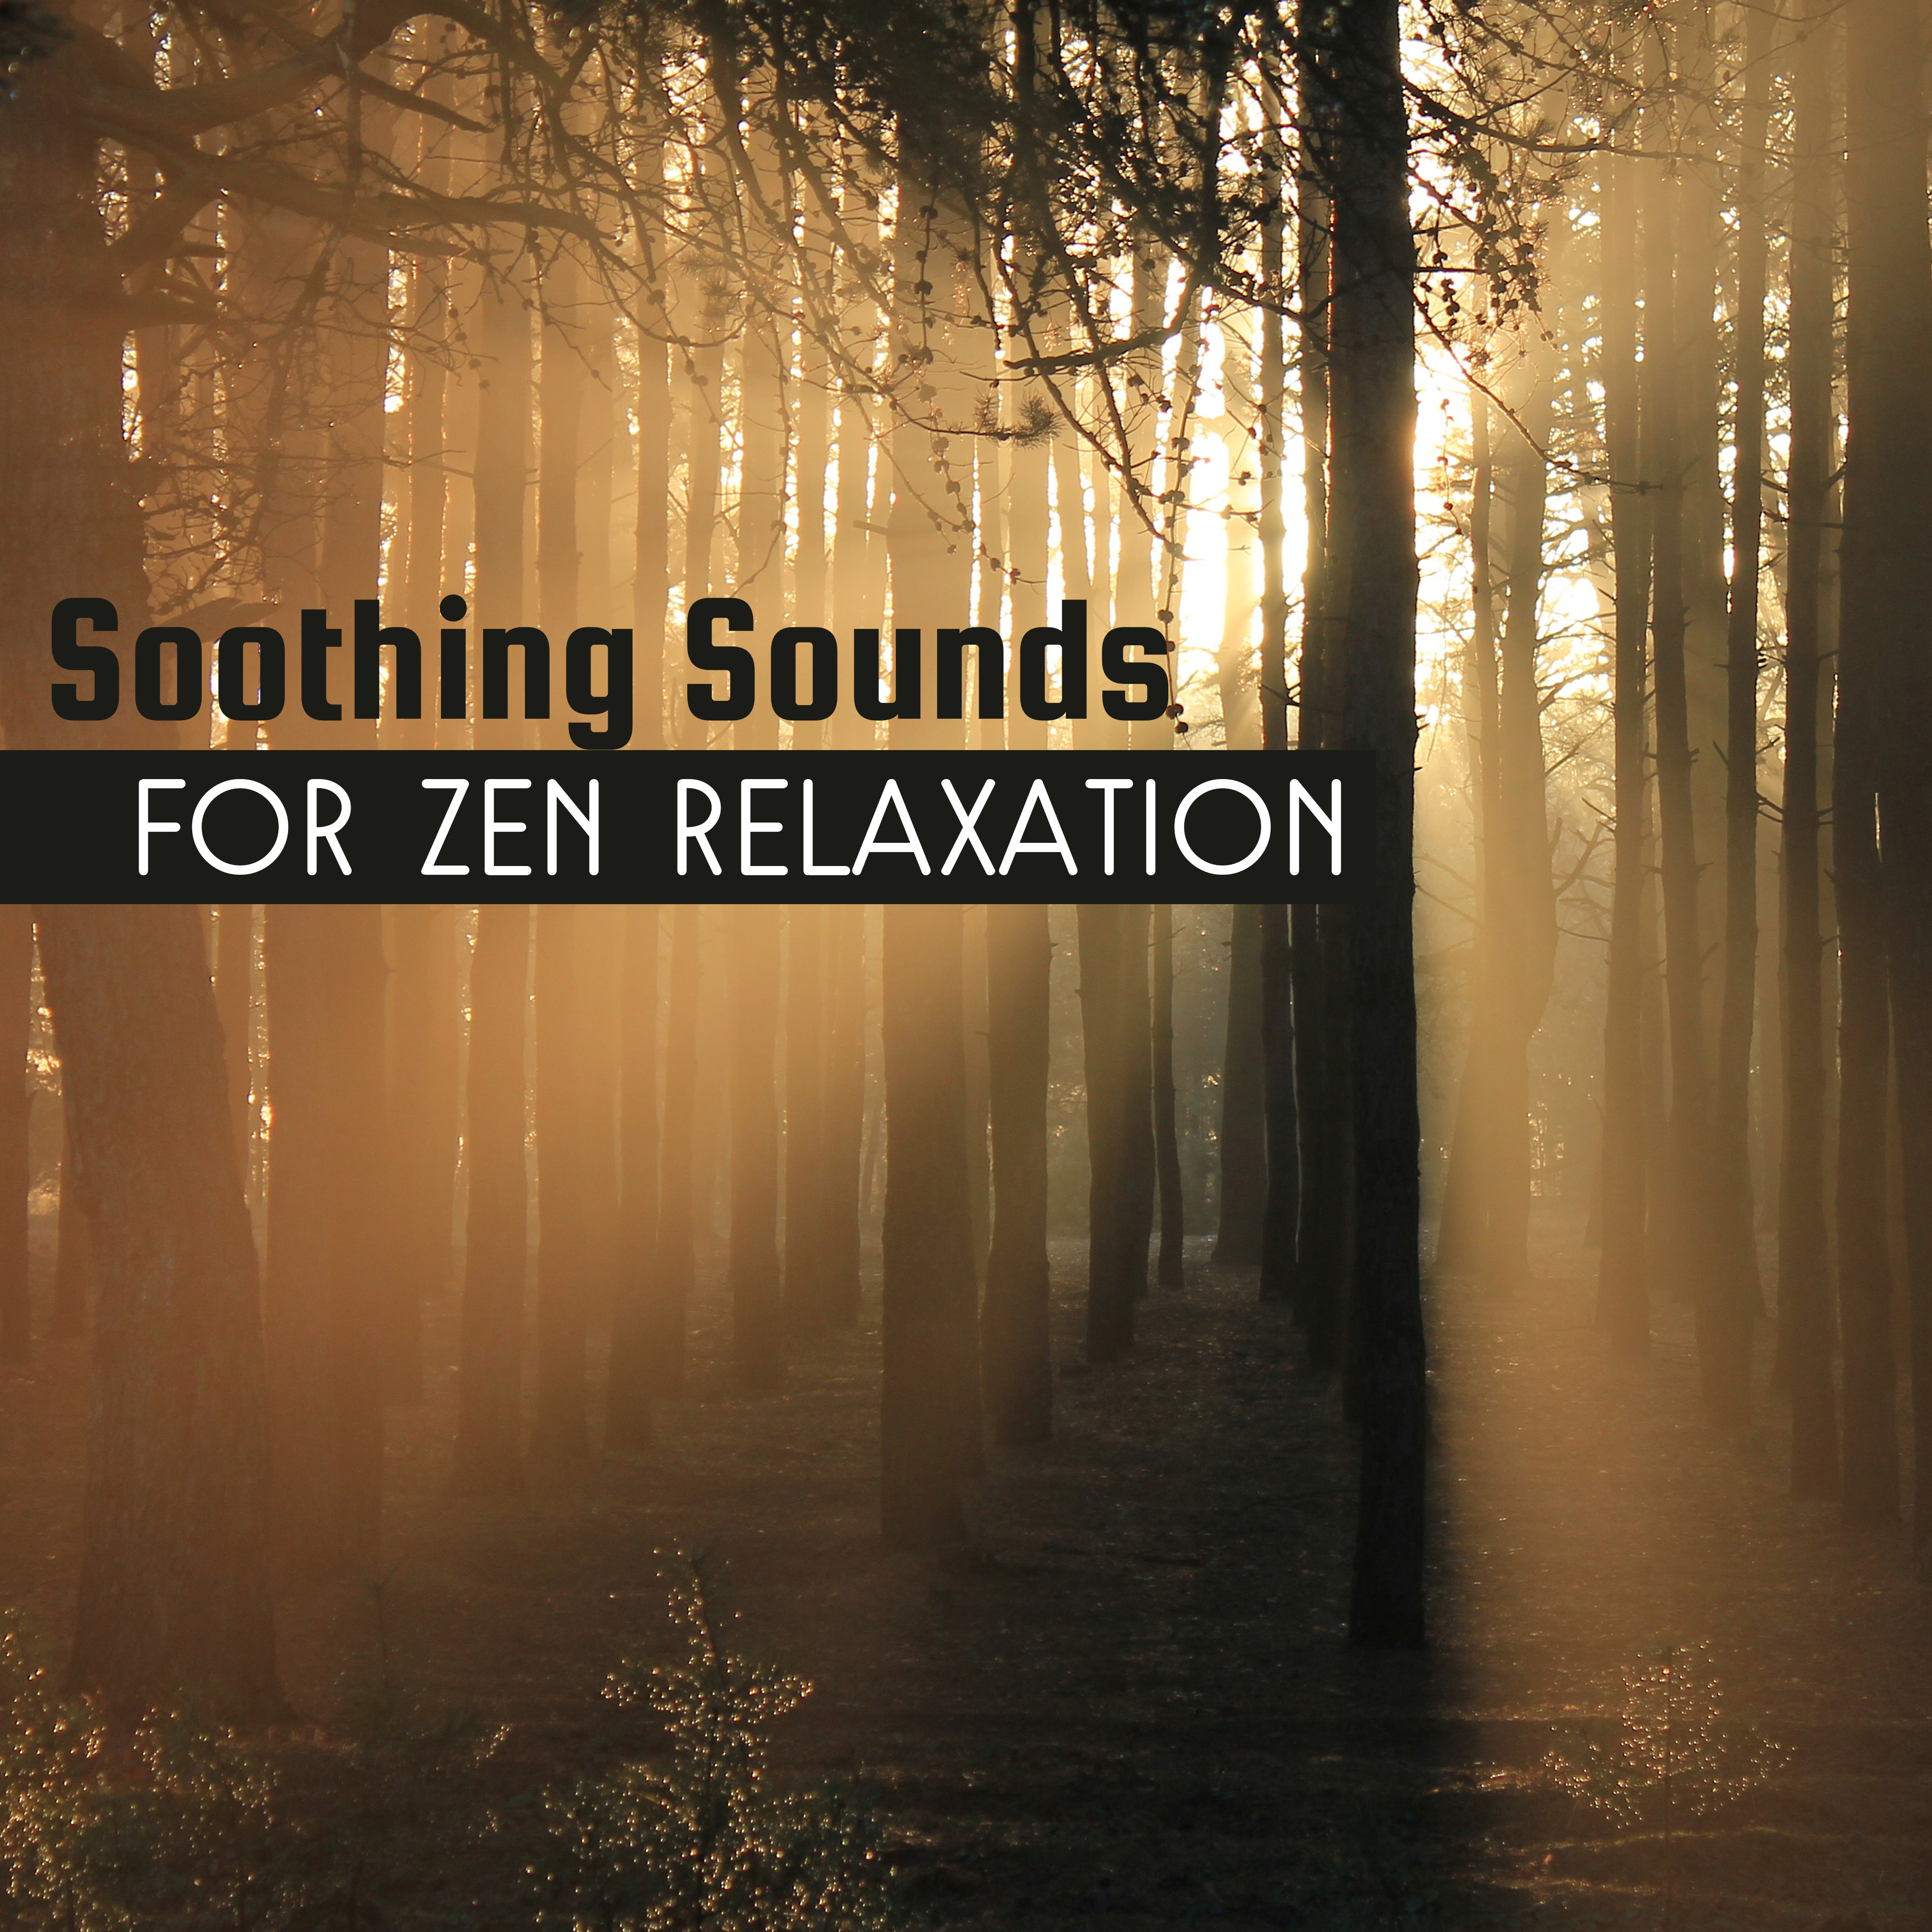 Soothing Sounds for Zen Relaxation